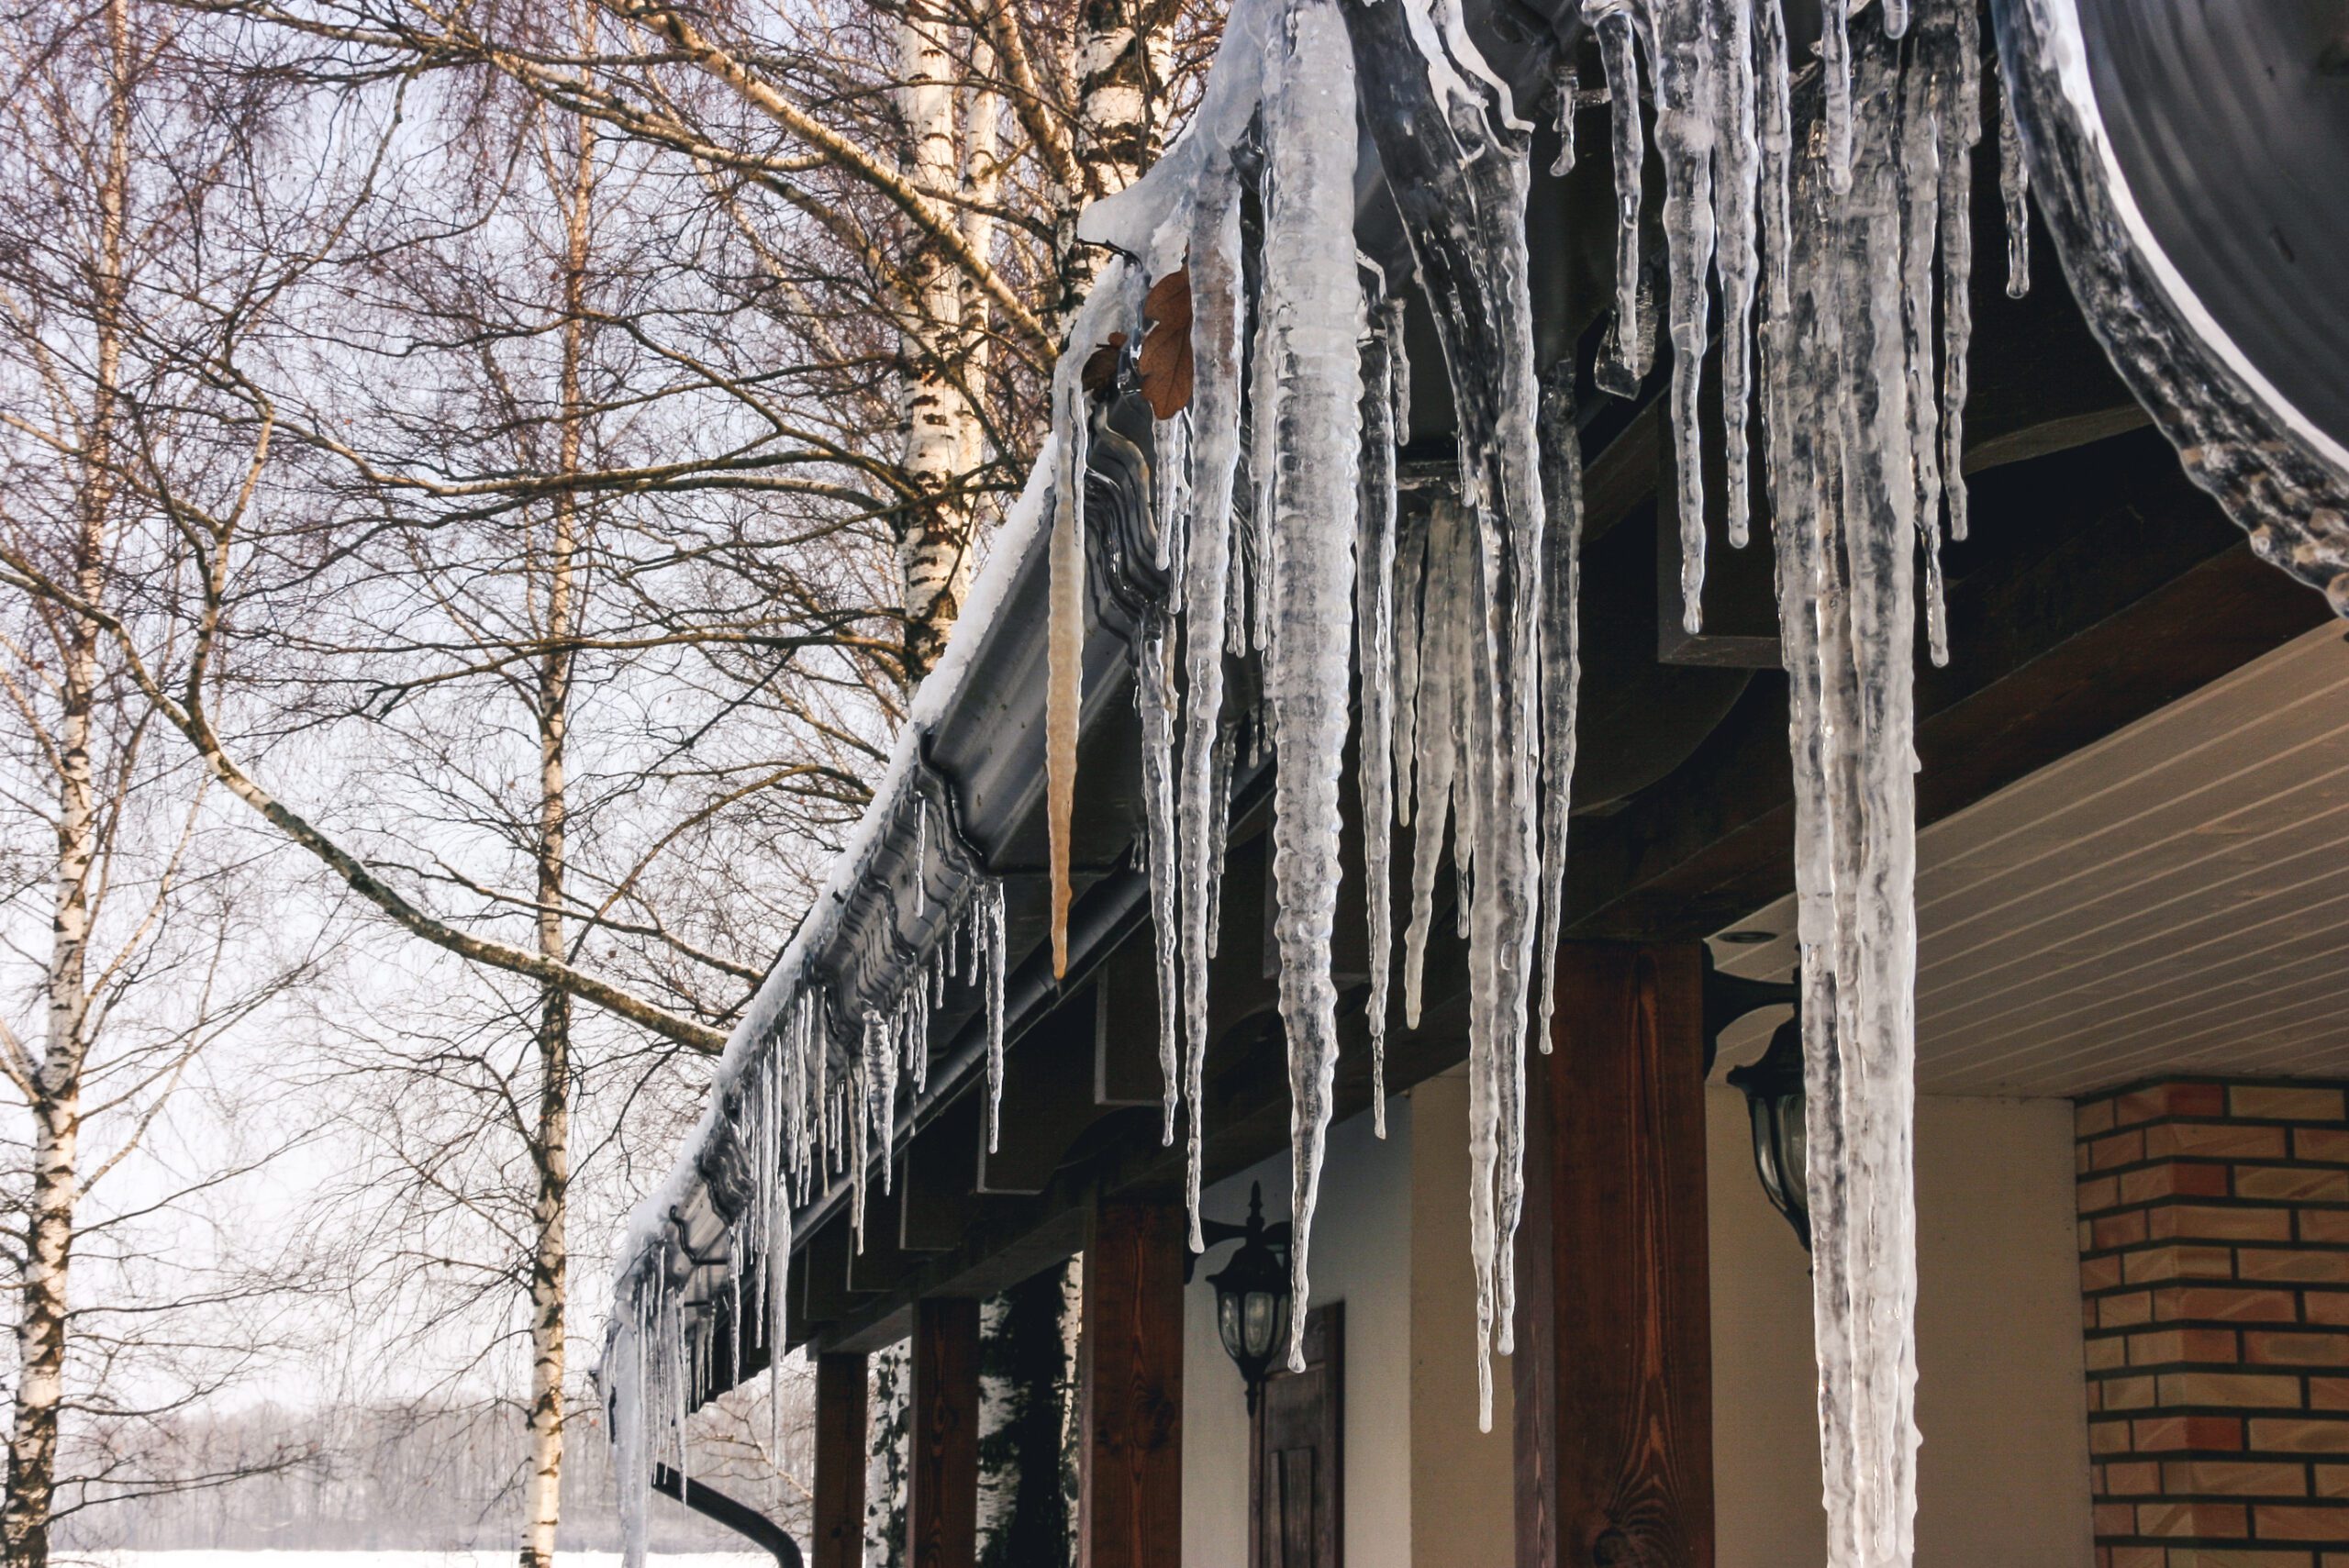 Keep These Tips In Mind To Prevent Frozen Pipes